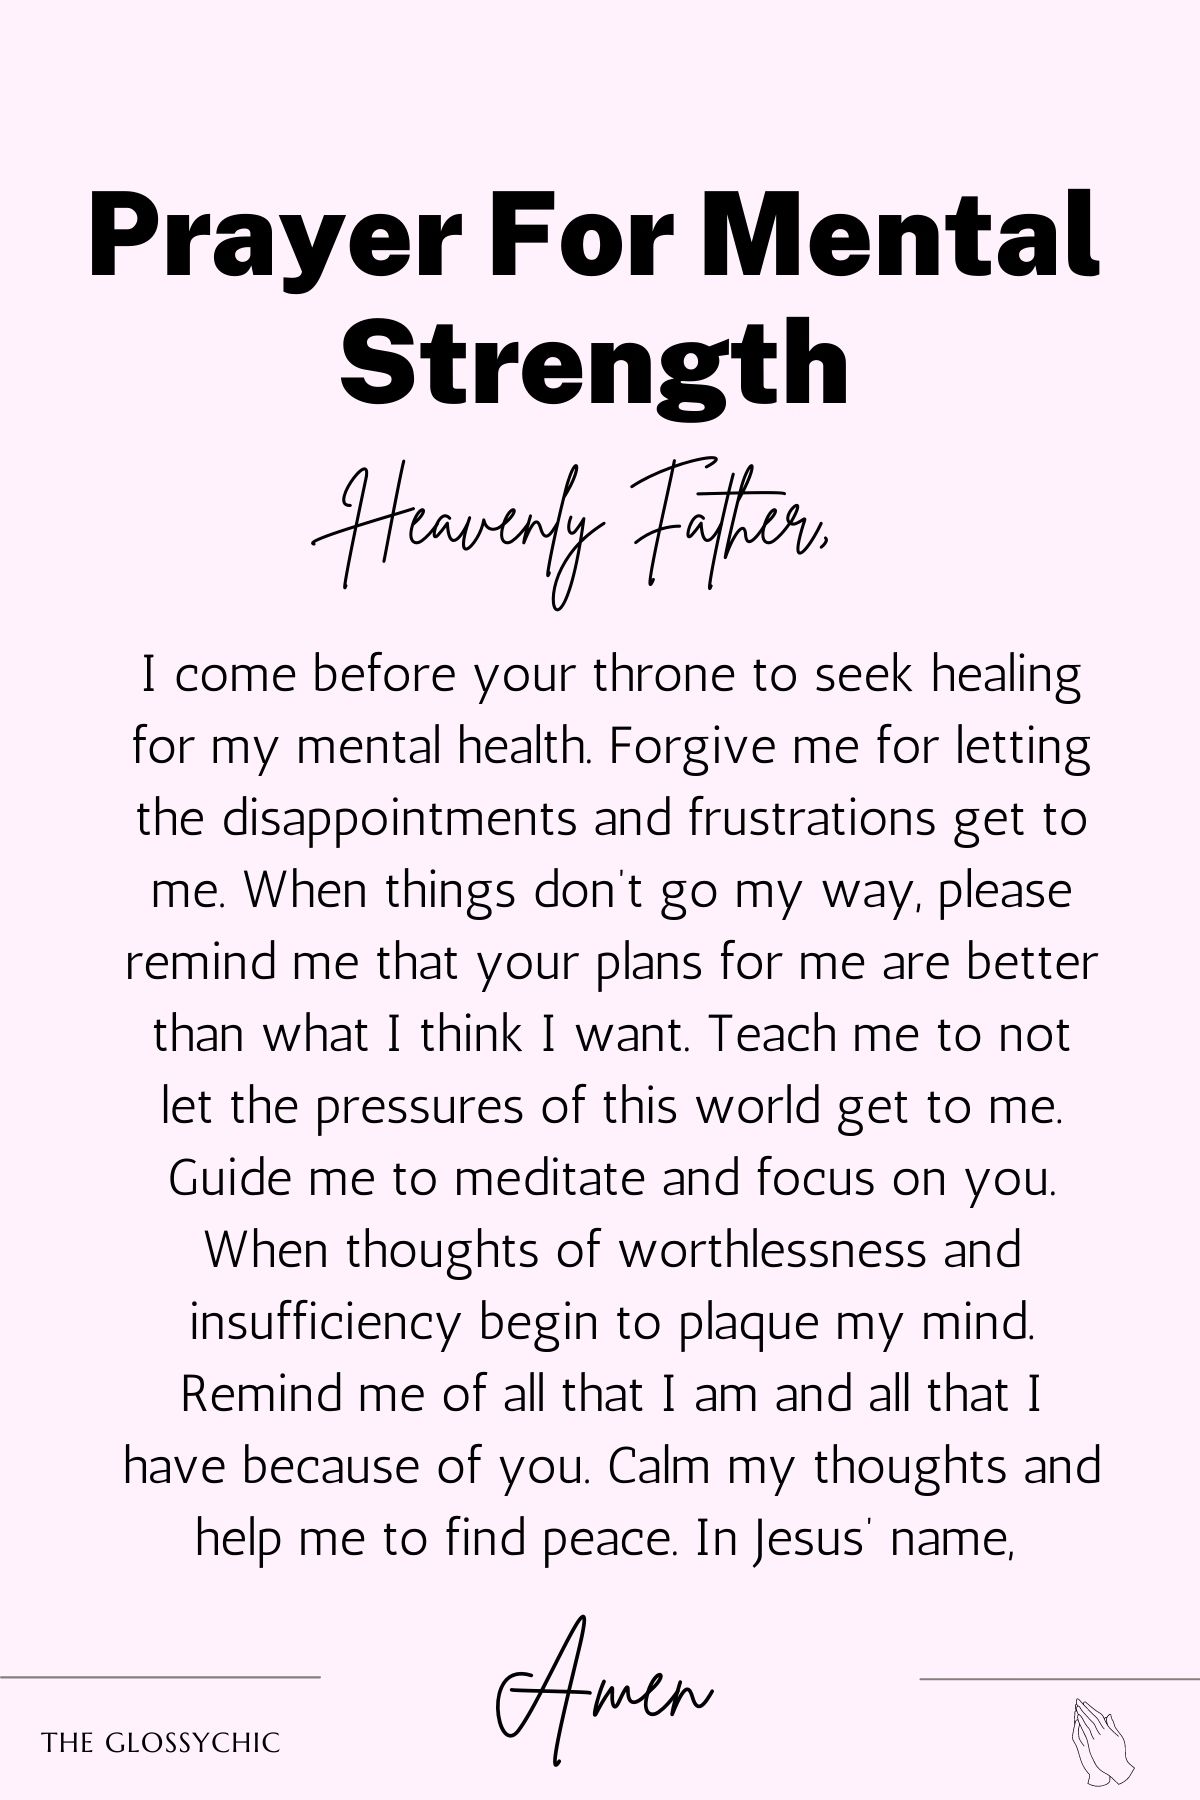 Prayer for mental and strength